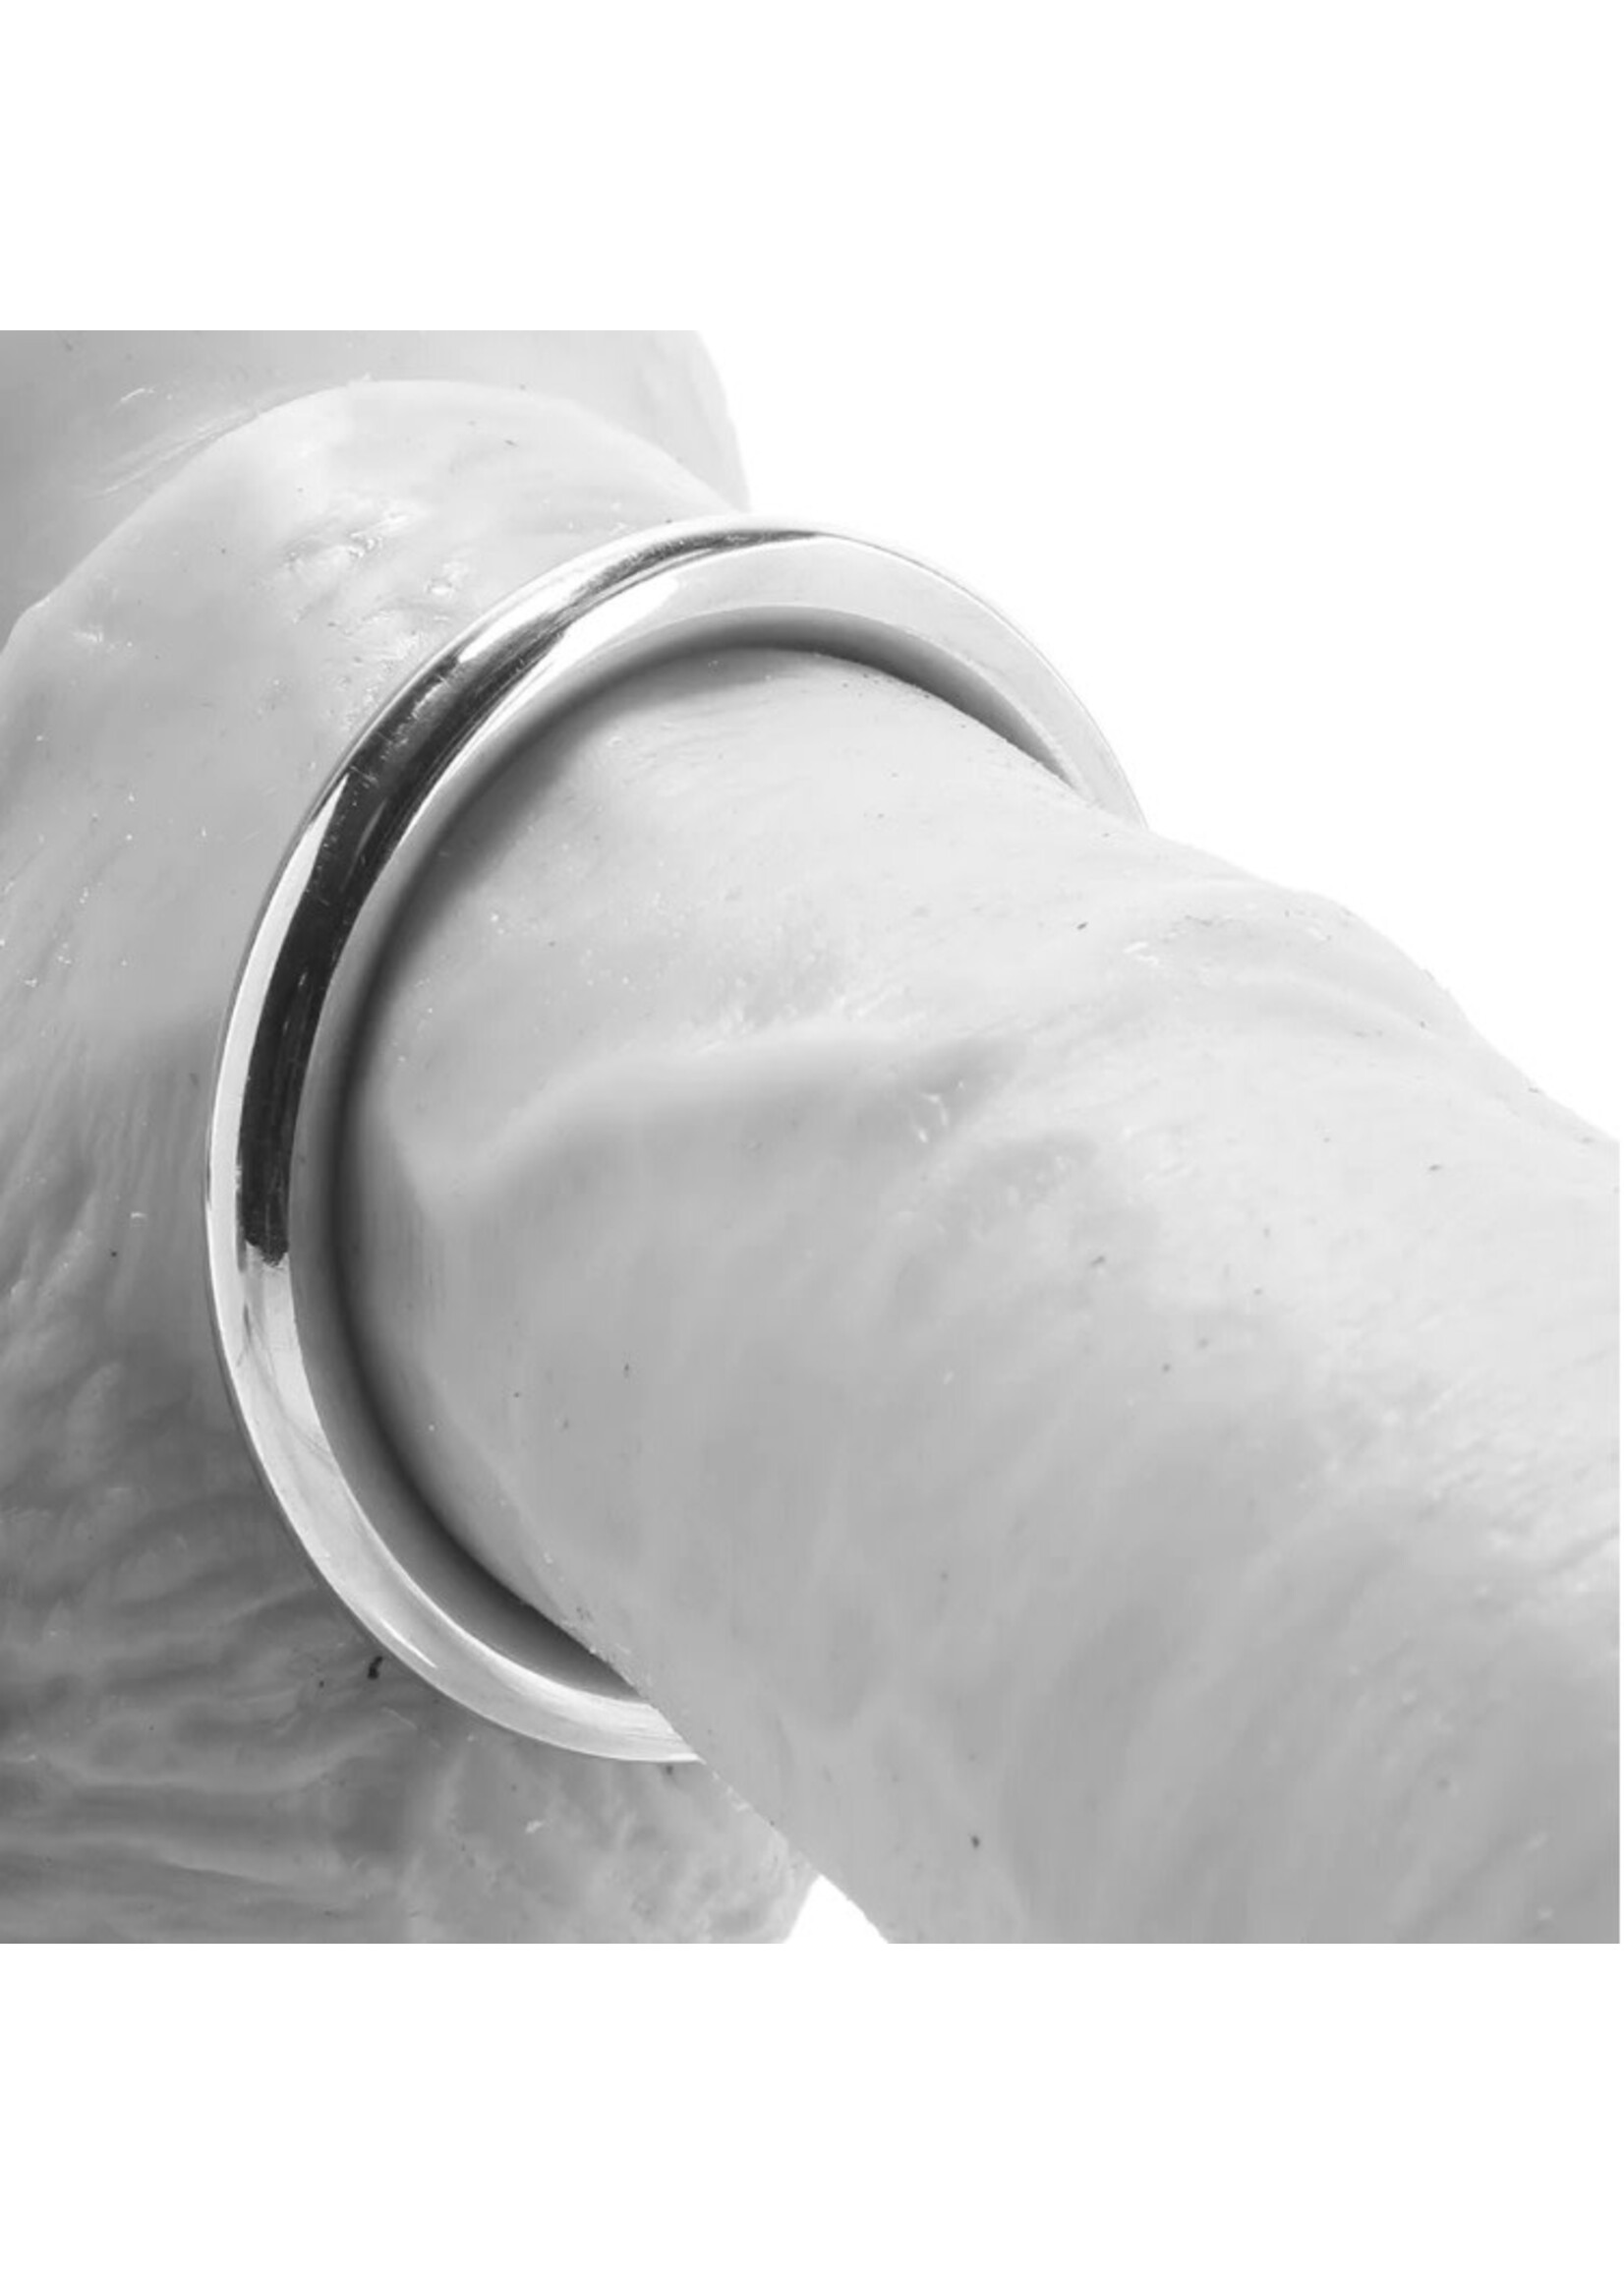 Stainless Steel 3 Piece Cock Ring Set